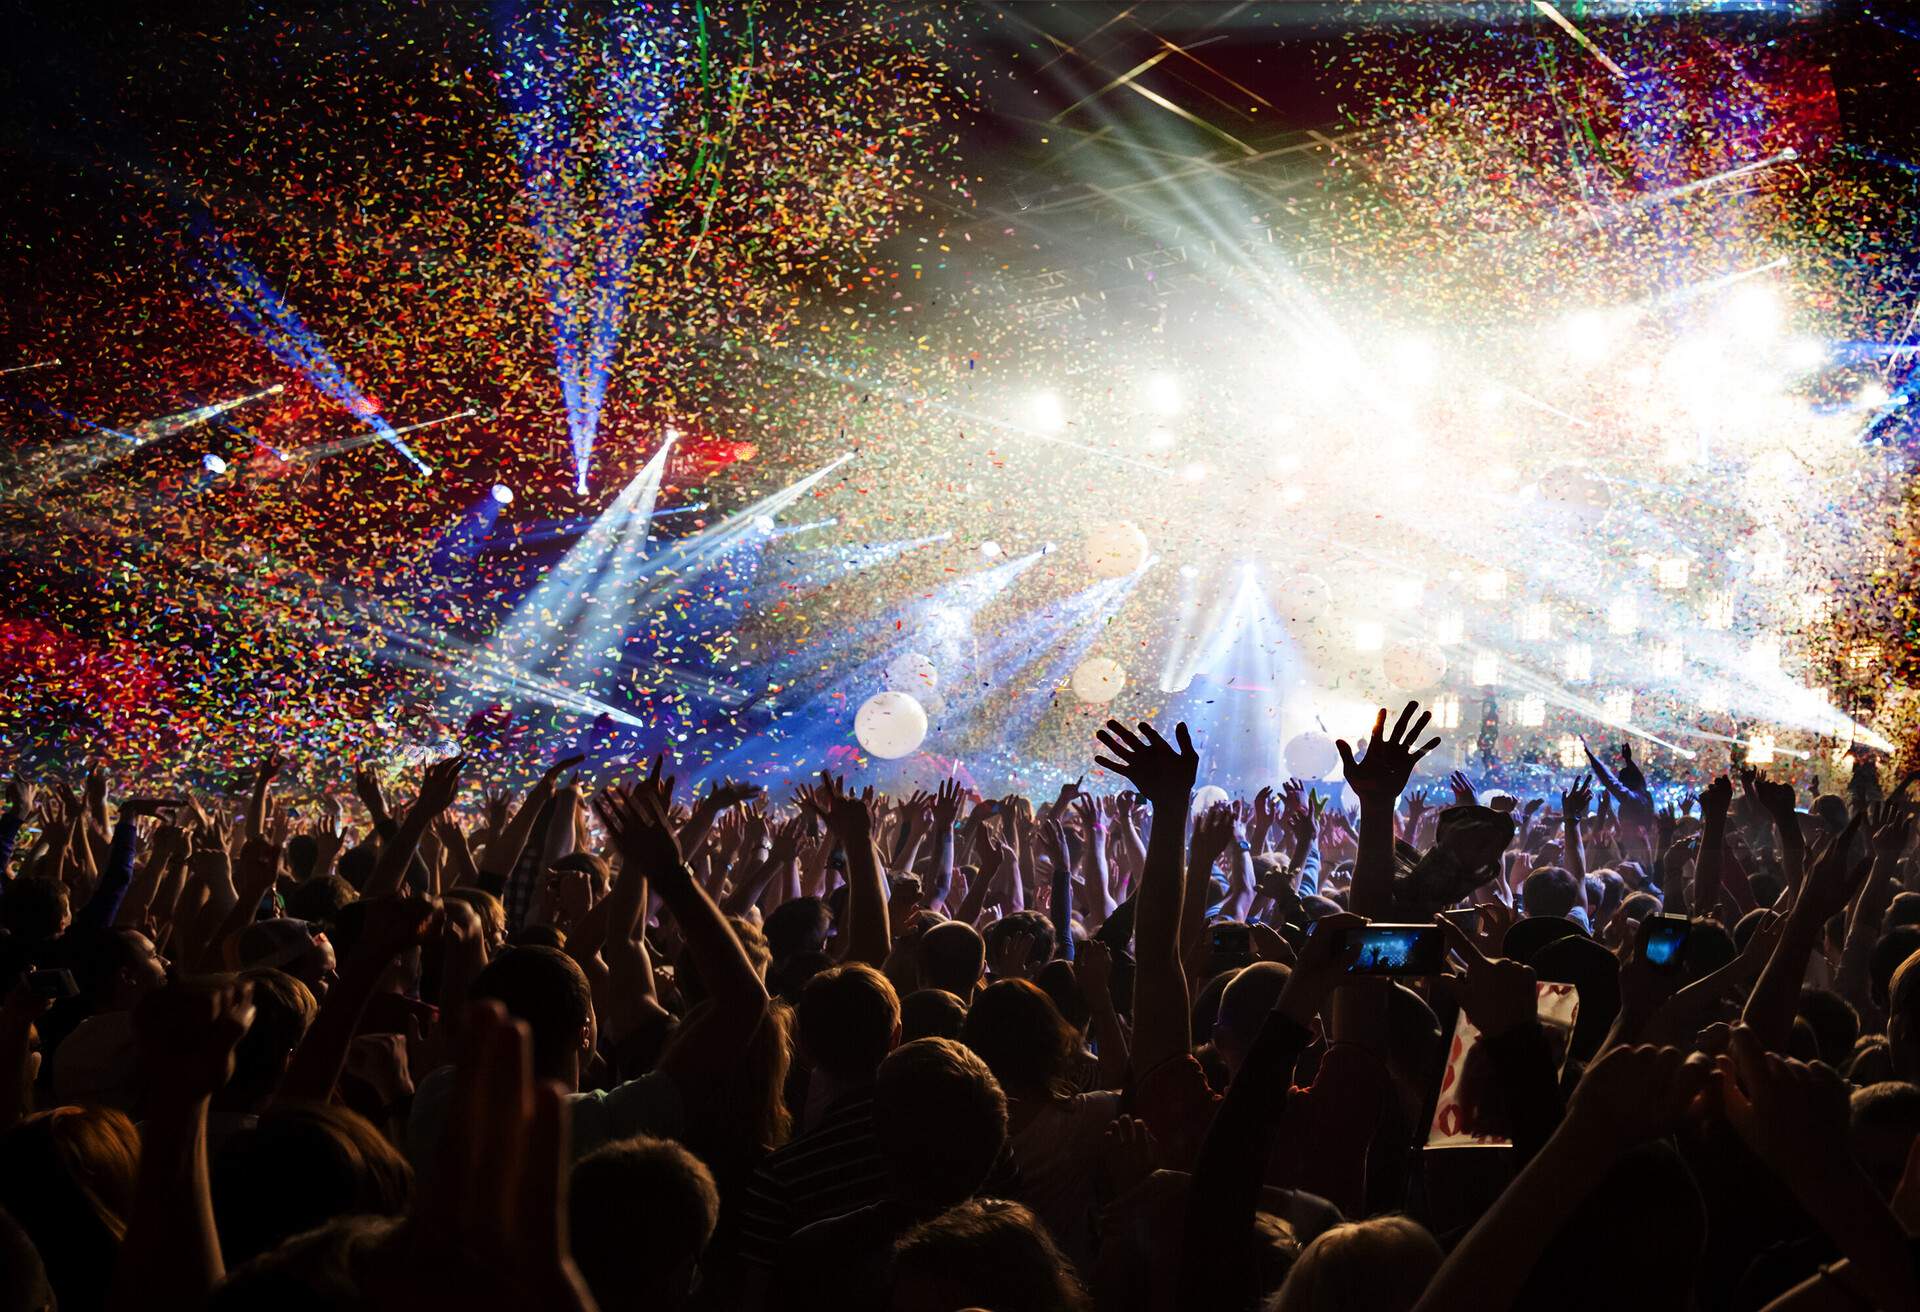 Silhouette of people raising their hands in a concert with glaring stage lights and colourful confetti in the air.